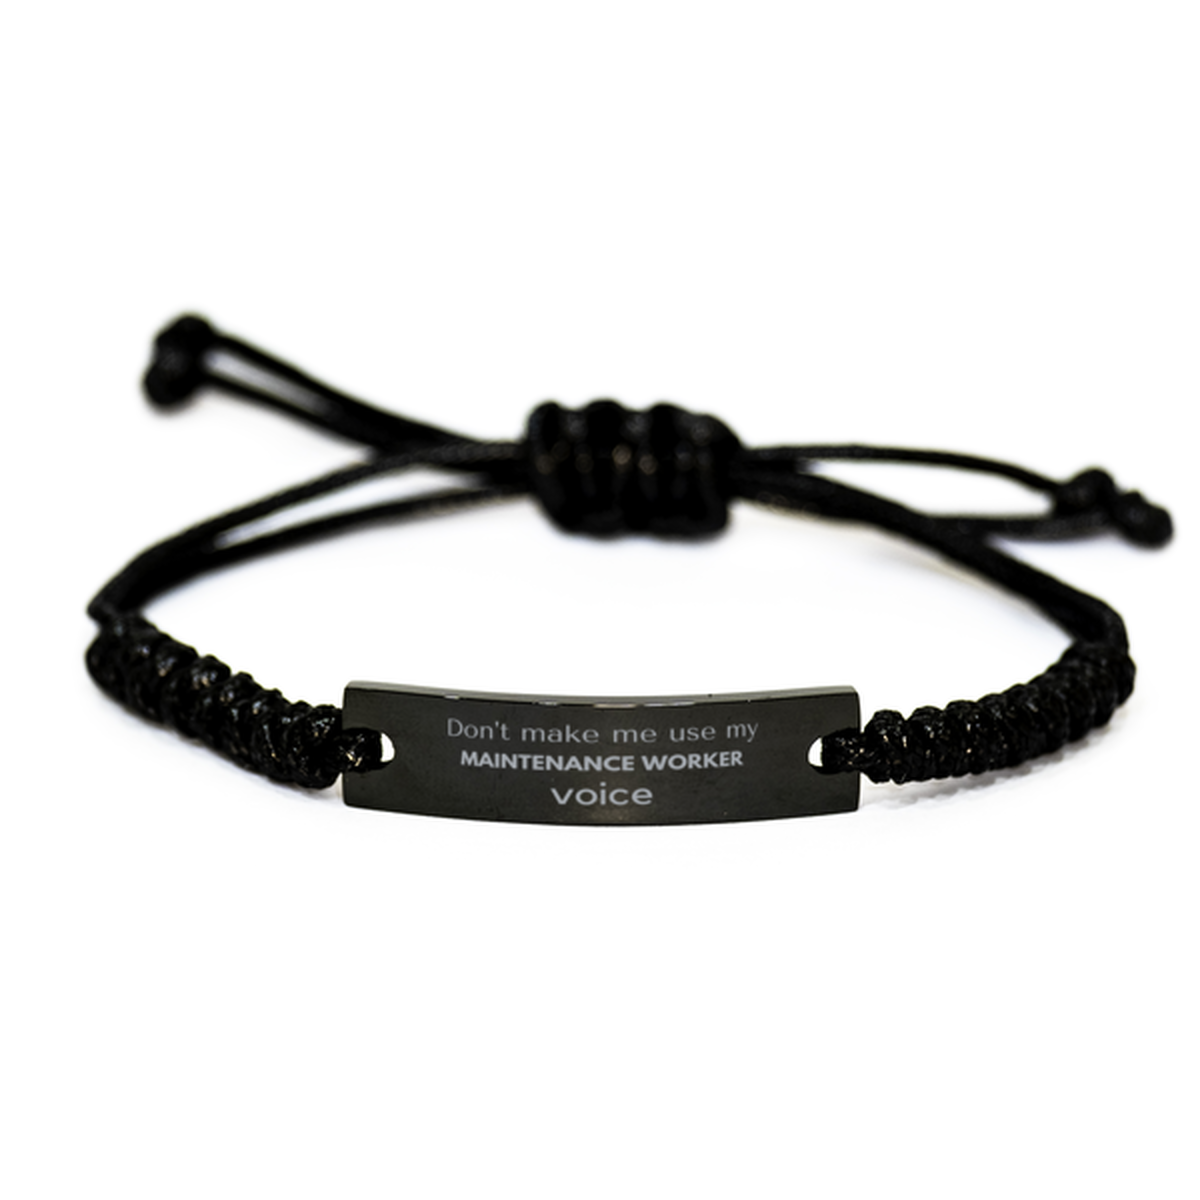 Don't make me use my Maintenance Worker voice, Sarcasm Maintenance Worker Gifts, Christmas Maintenance Worker Black Rope Bracelet Birthday Unique Gifts For Maintenance Worker Coworkers, Men, Women, Colleague, Friends